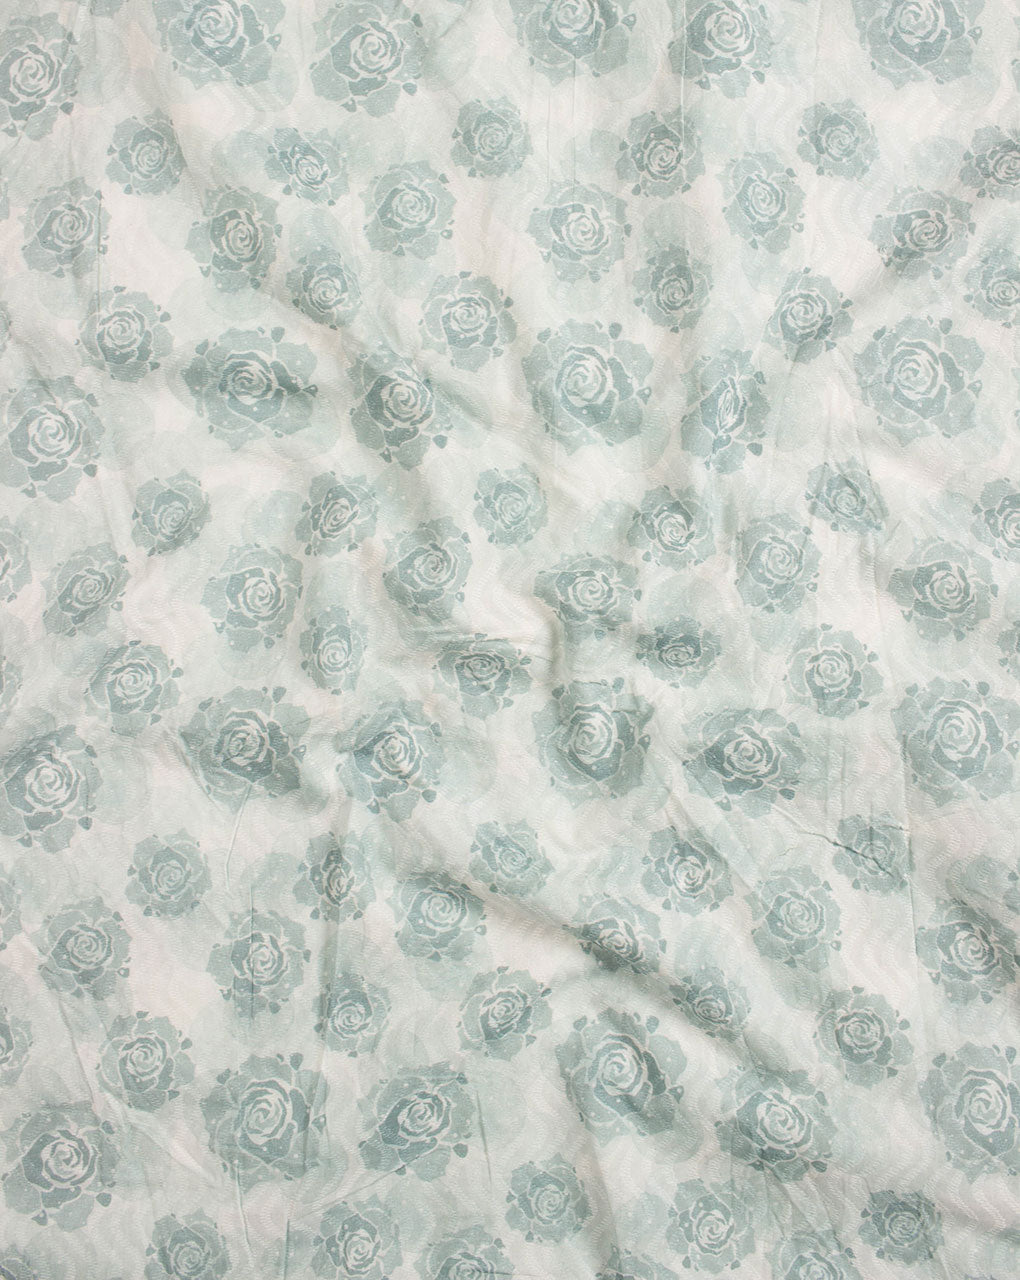 Off-White Grey Floral Digital Print Dobby Cotton Fabric - Fabriclore.com